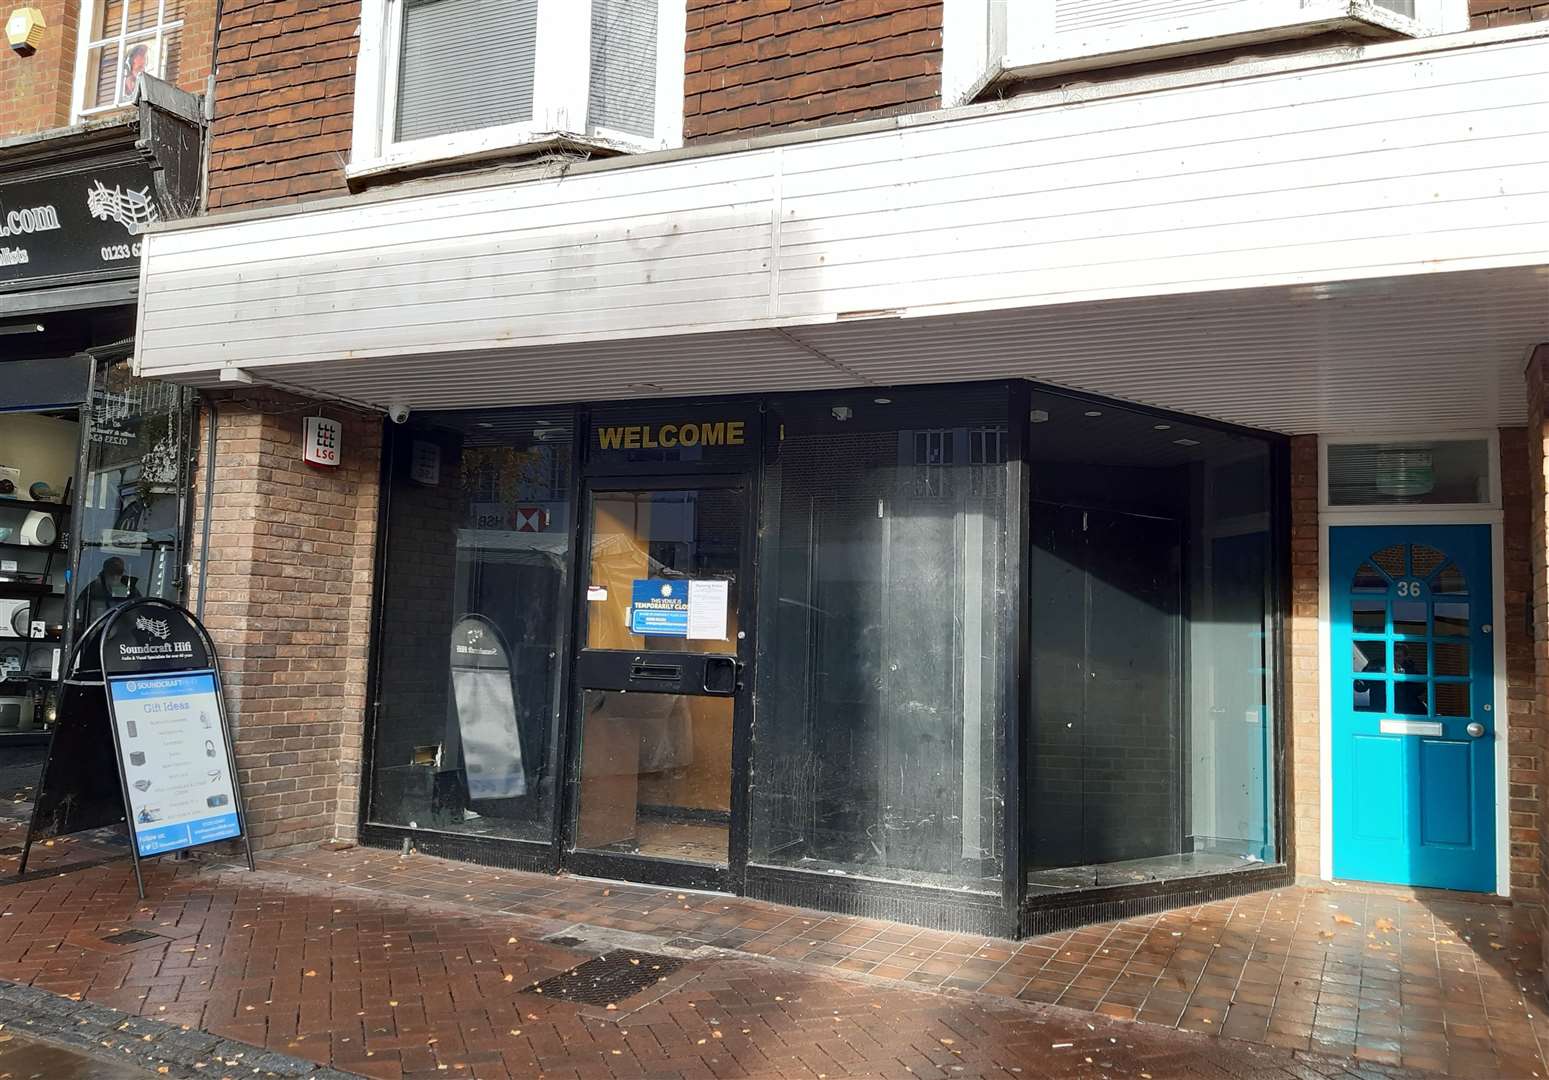 The former Cashino site in the Lower High Street could become a restaurant featuring a sushi bar